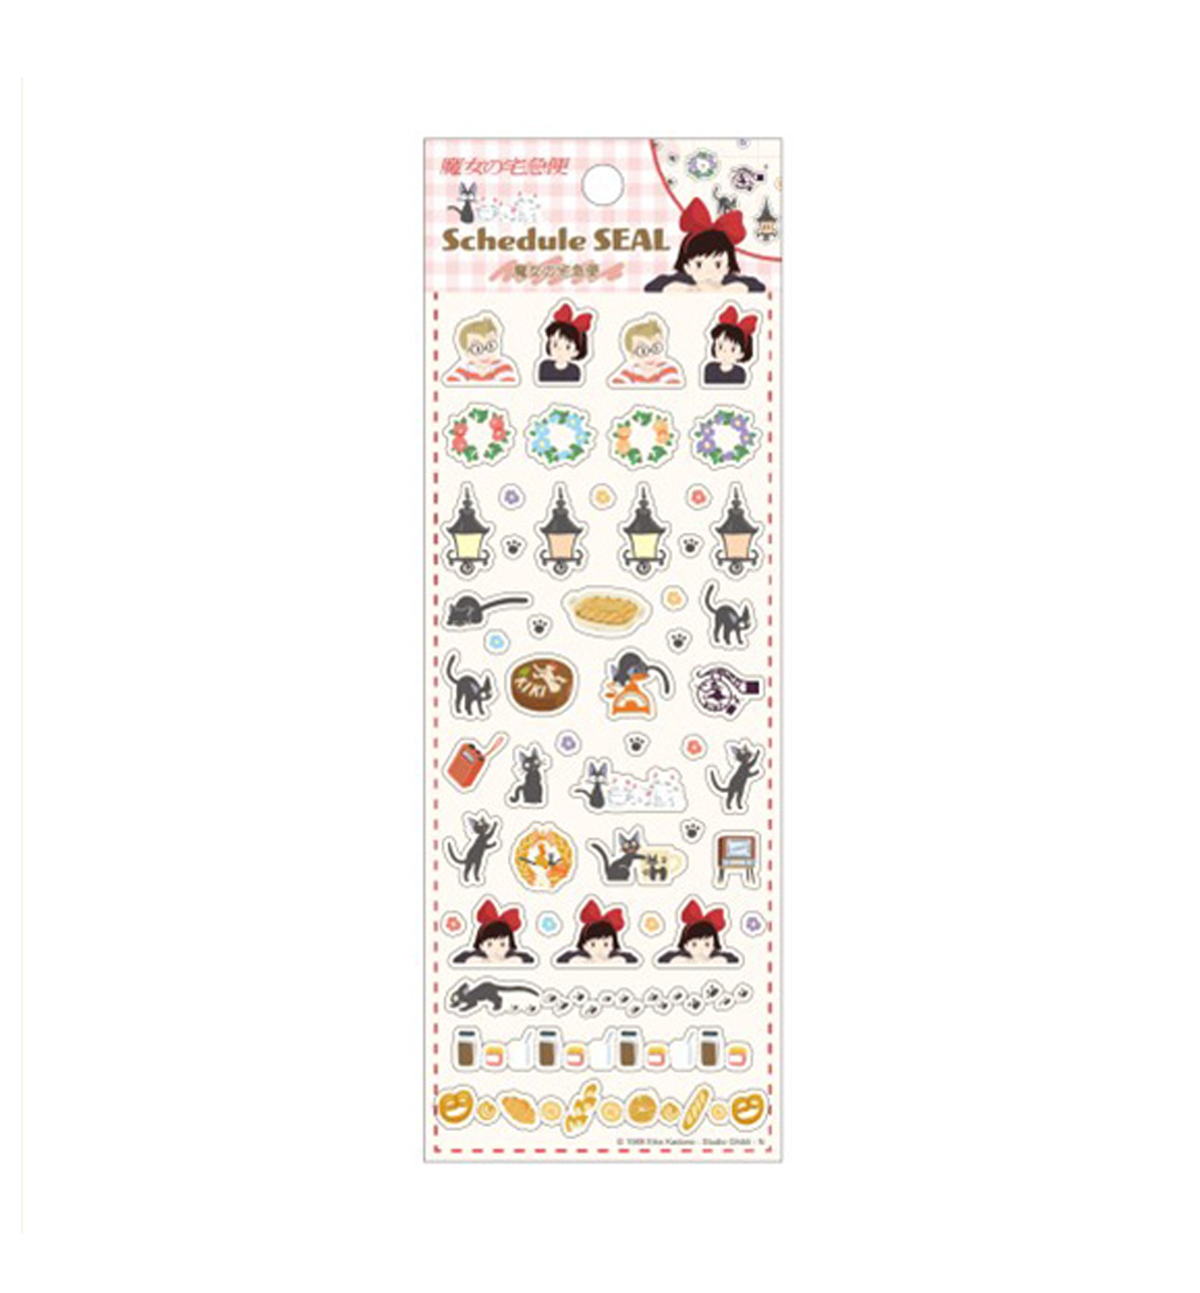 Kiki's Delivery Service Seal Sticker [Witch]